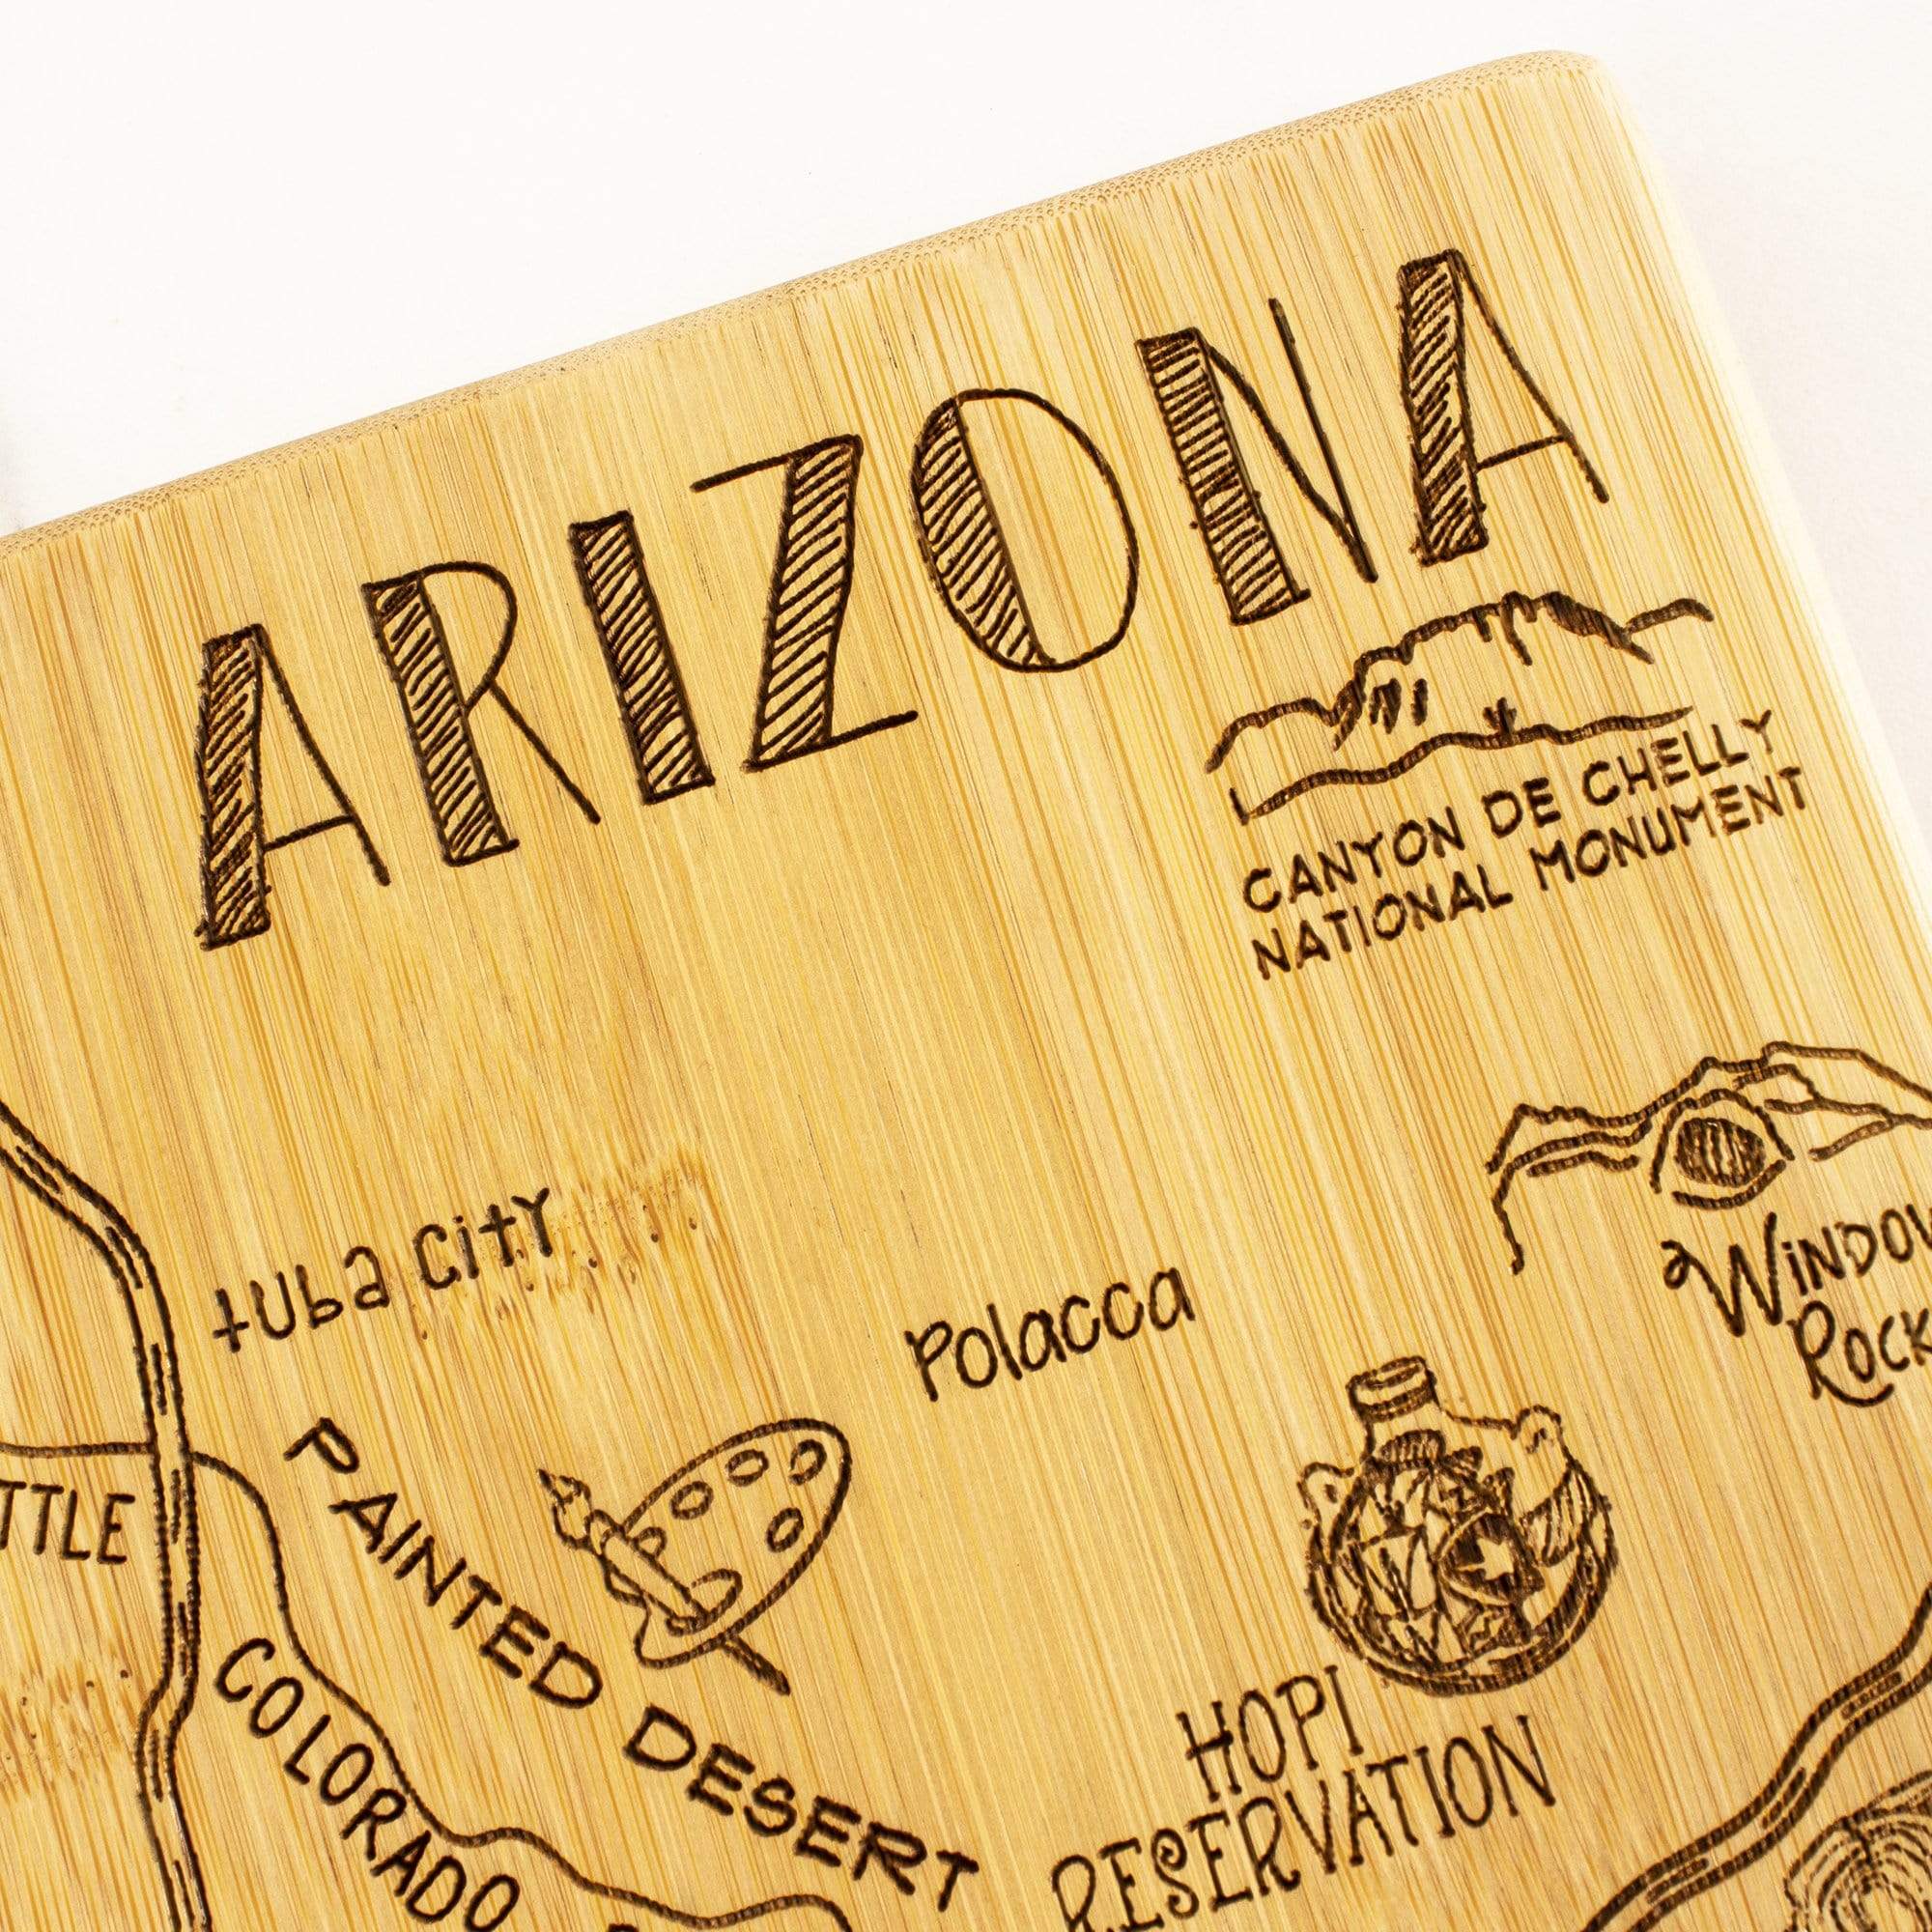 Totally Bamboo Destination Arizona State Shaped Bamboo Serving and Cutting Board